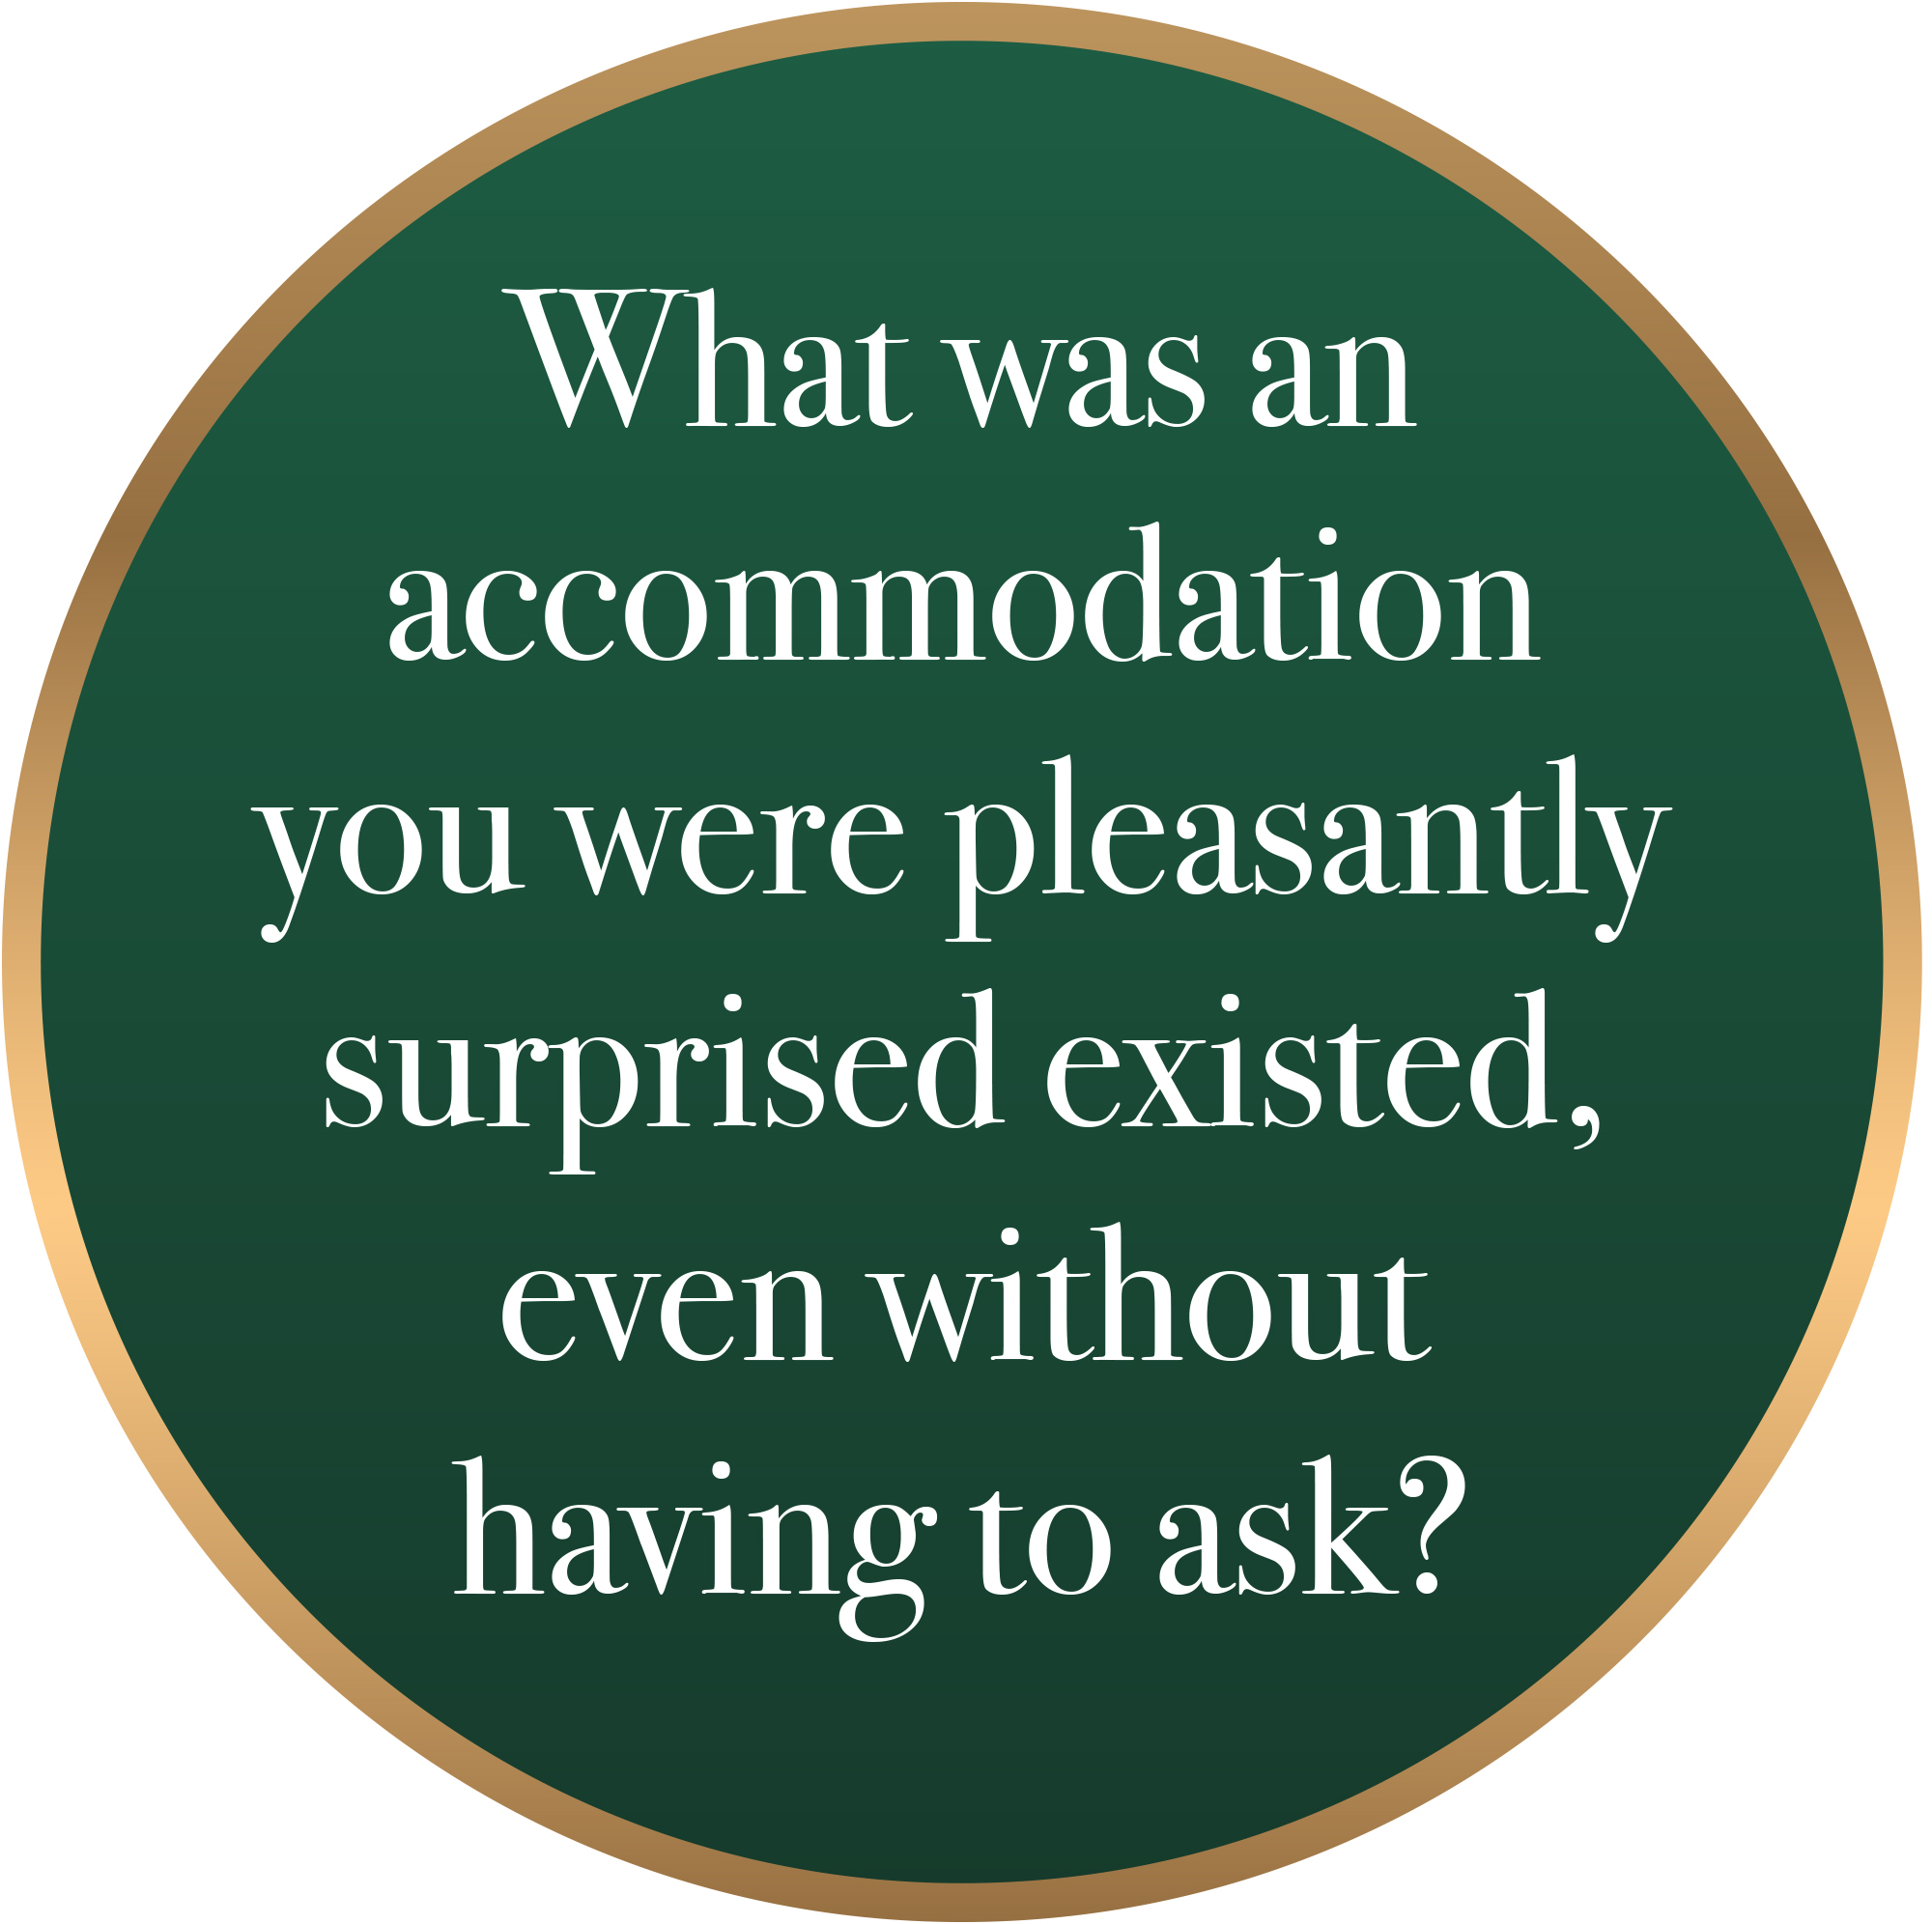 What was one accommodation you were pleasantly surprised existed, even without having to ask?